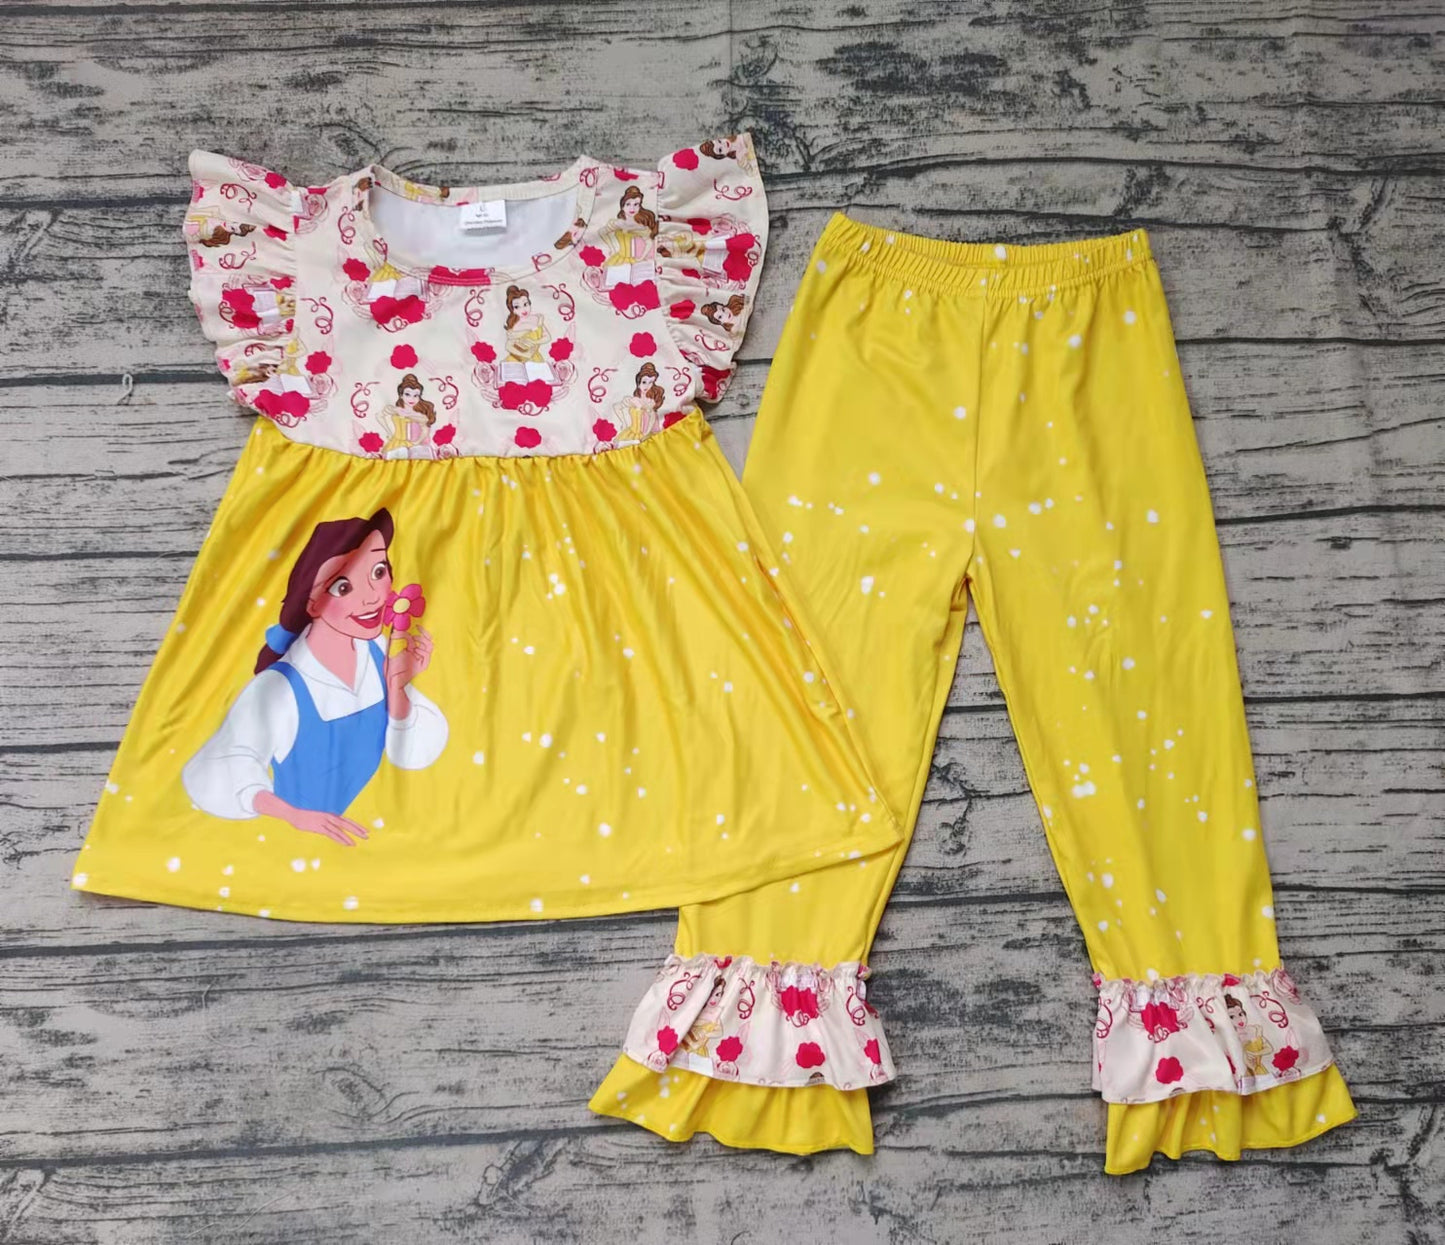 kids girl's outfit yellow princess pants outfit clothing